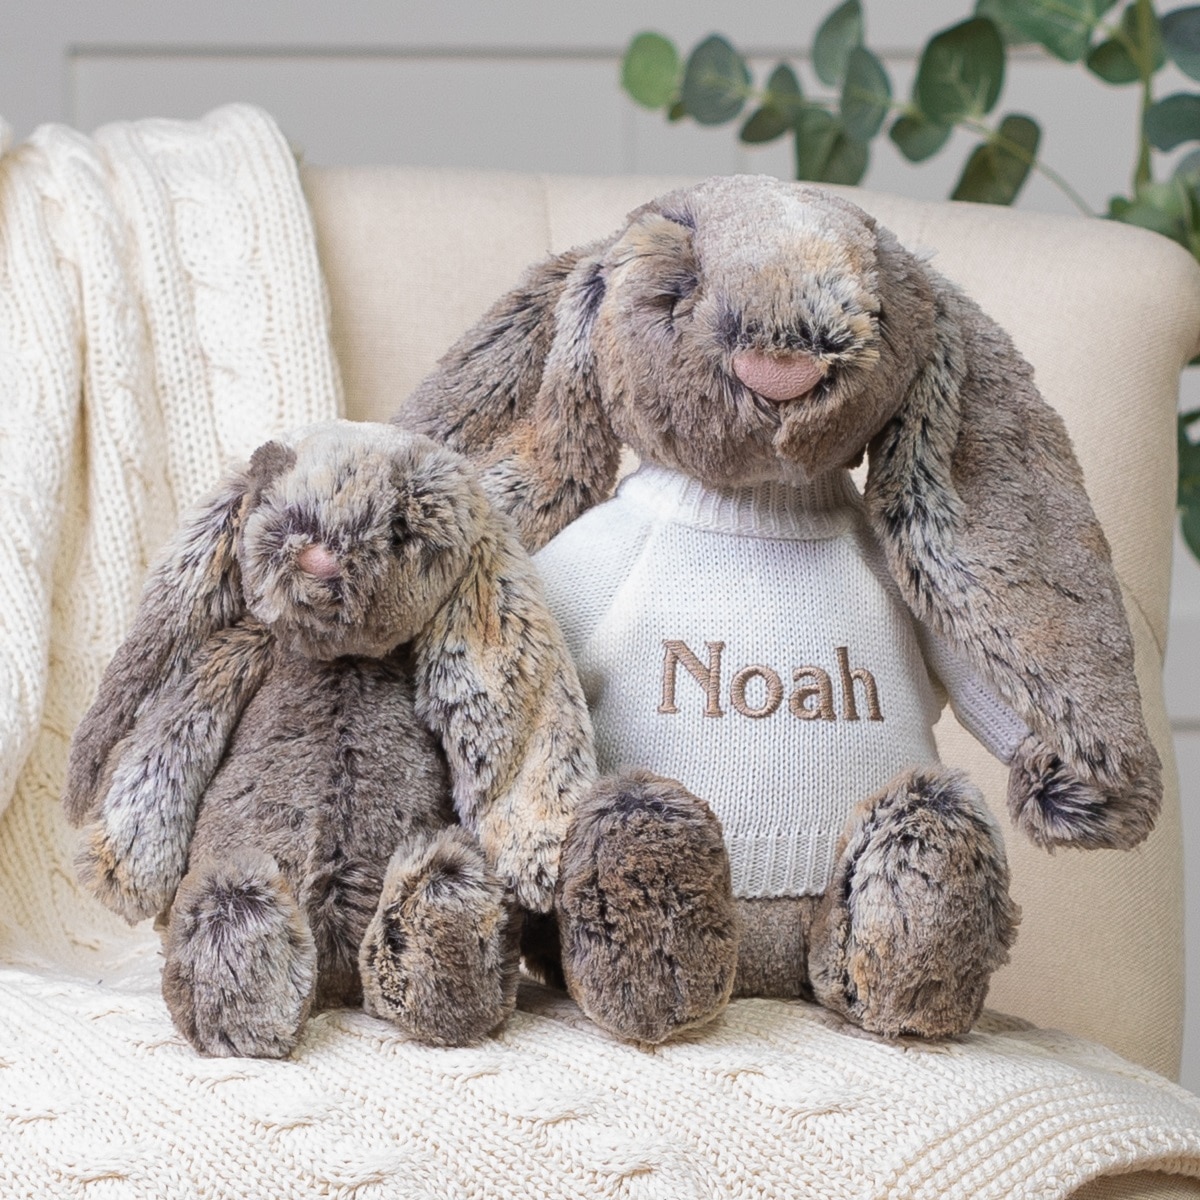 Personalised Jellycat cottontail bashful bunny soft toy